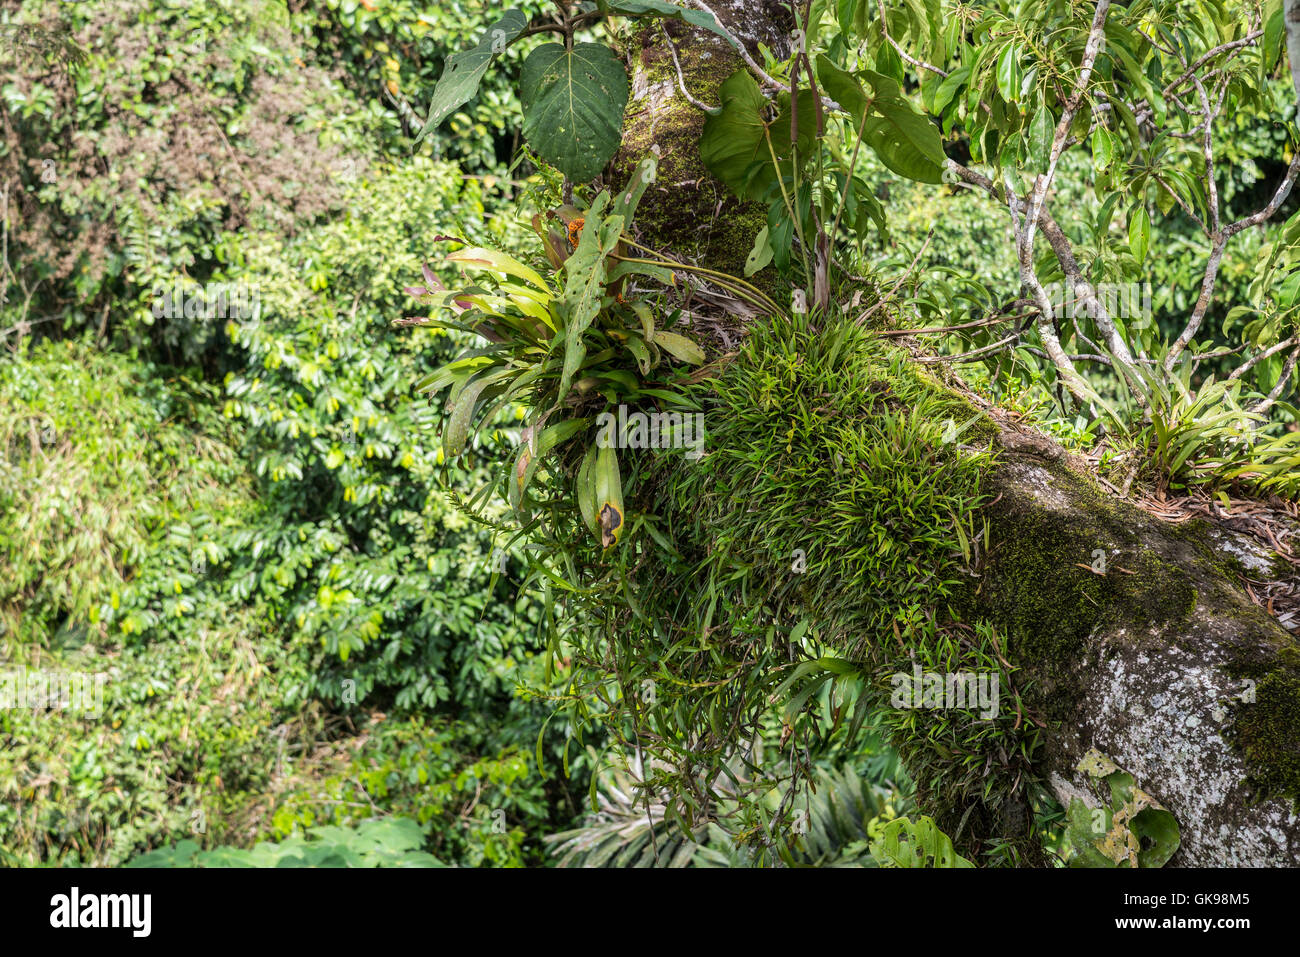 Tree trunk loaded with epiphytes such as bromeliads and orchids in the Amazons. Yasuni National Park, Ecuador, South America. Stock Photo